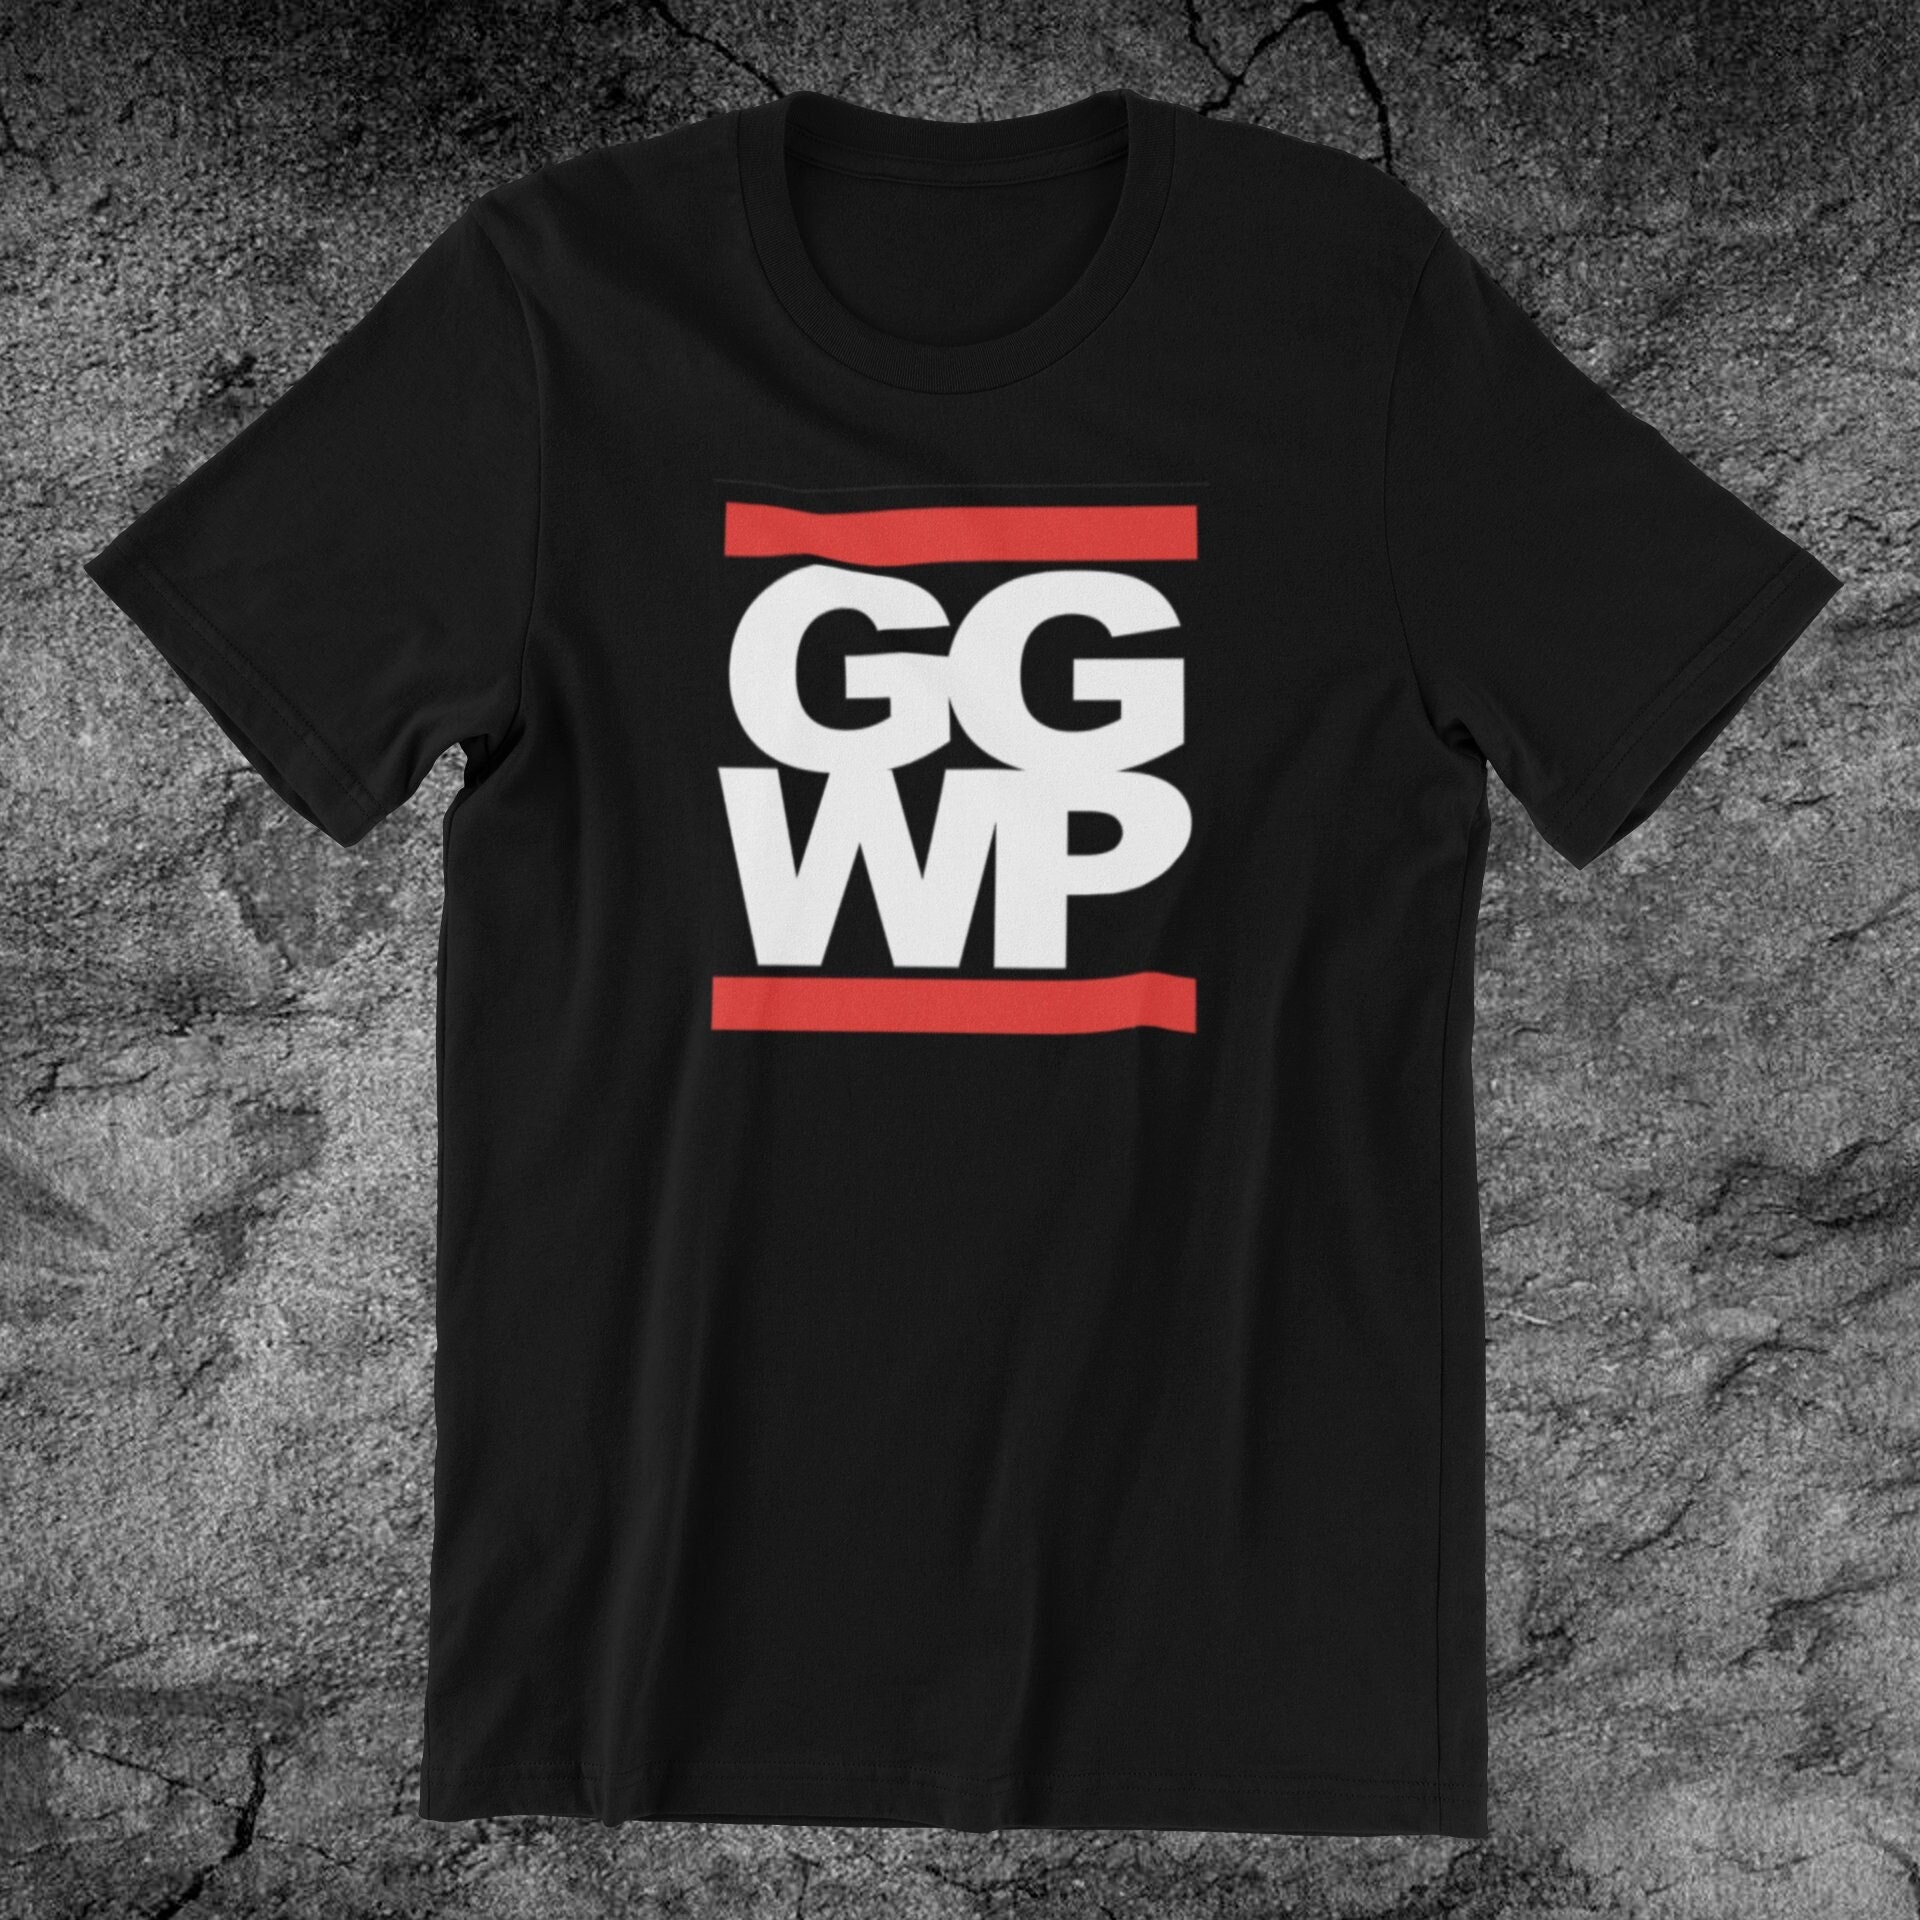  GGWP o GG WP - significa Good Game Well Played en Gamer  Premium T-Shirt : Ropa, Zapatos y Joyería